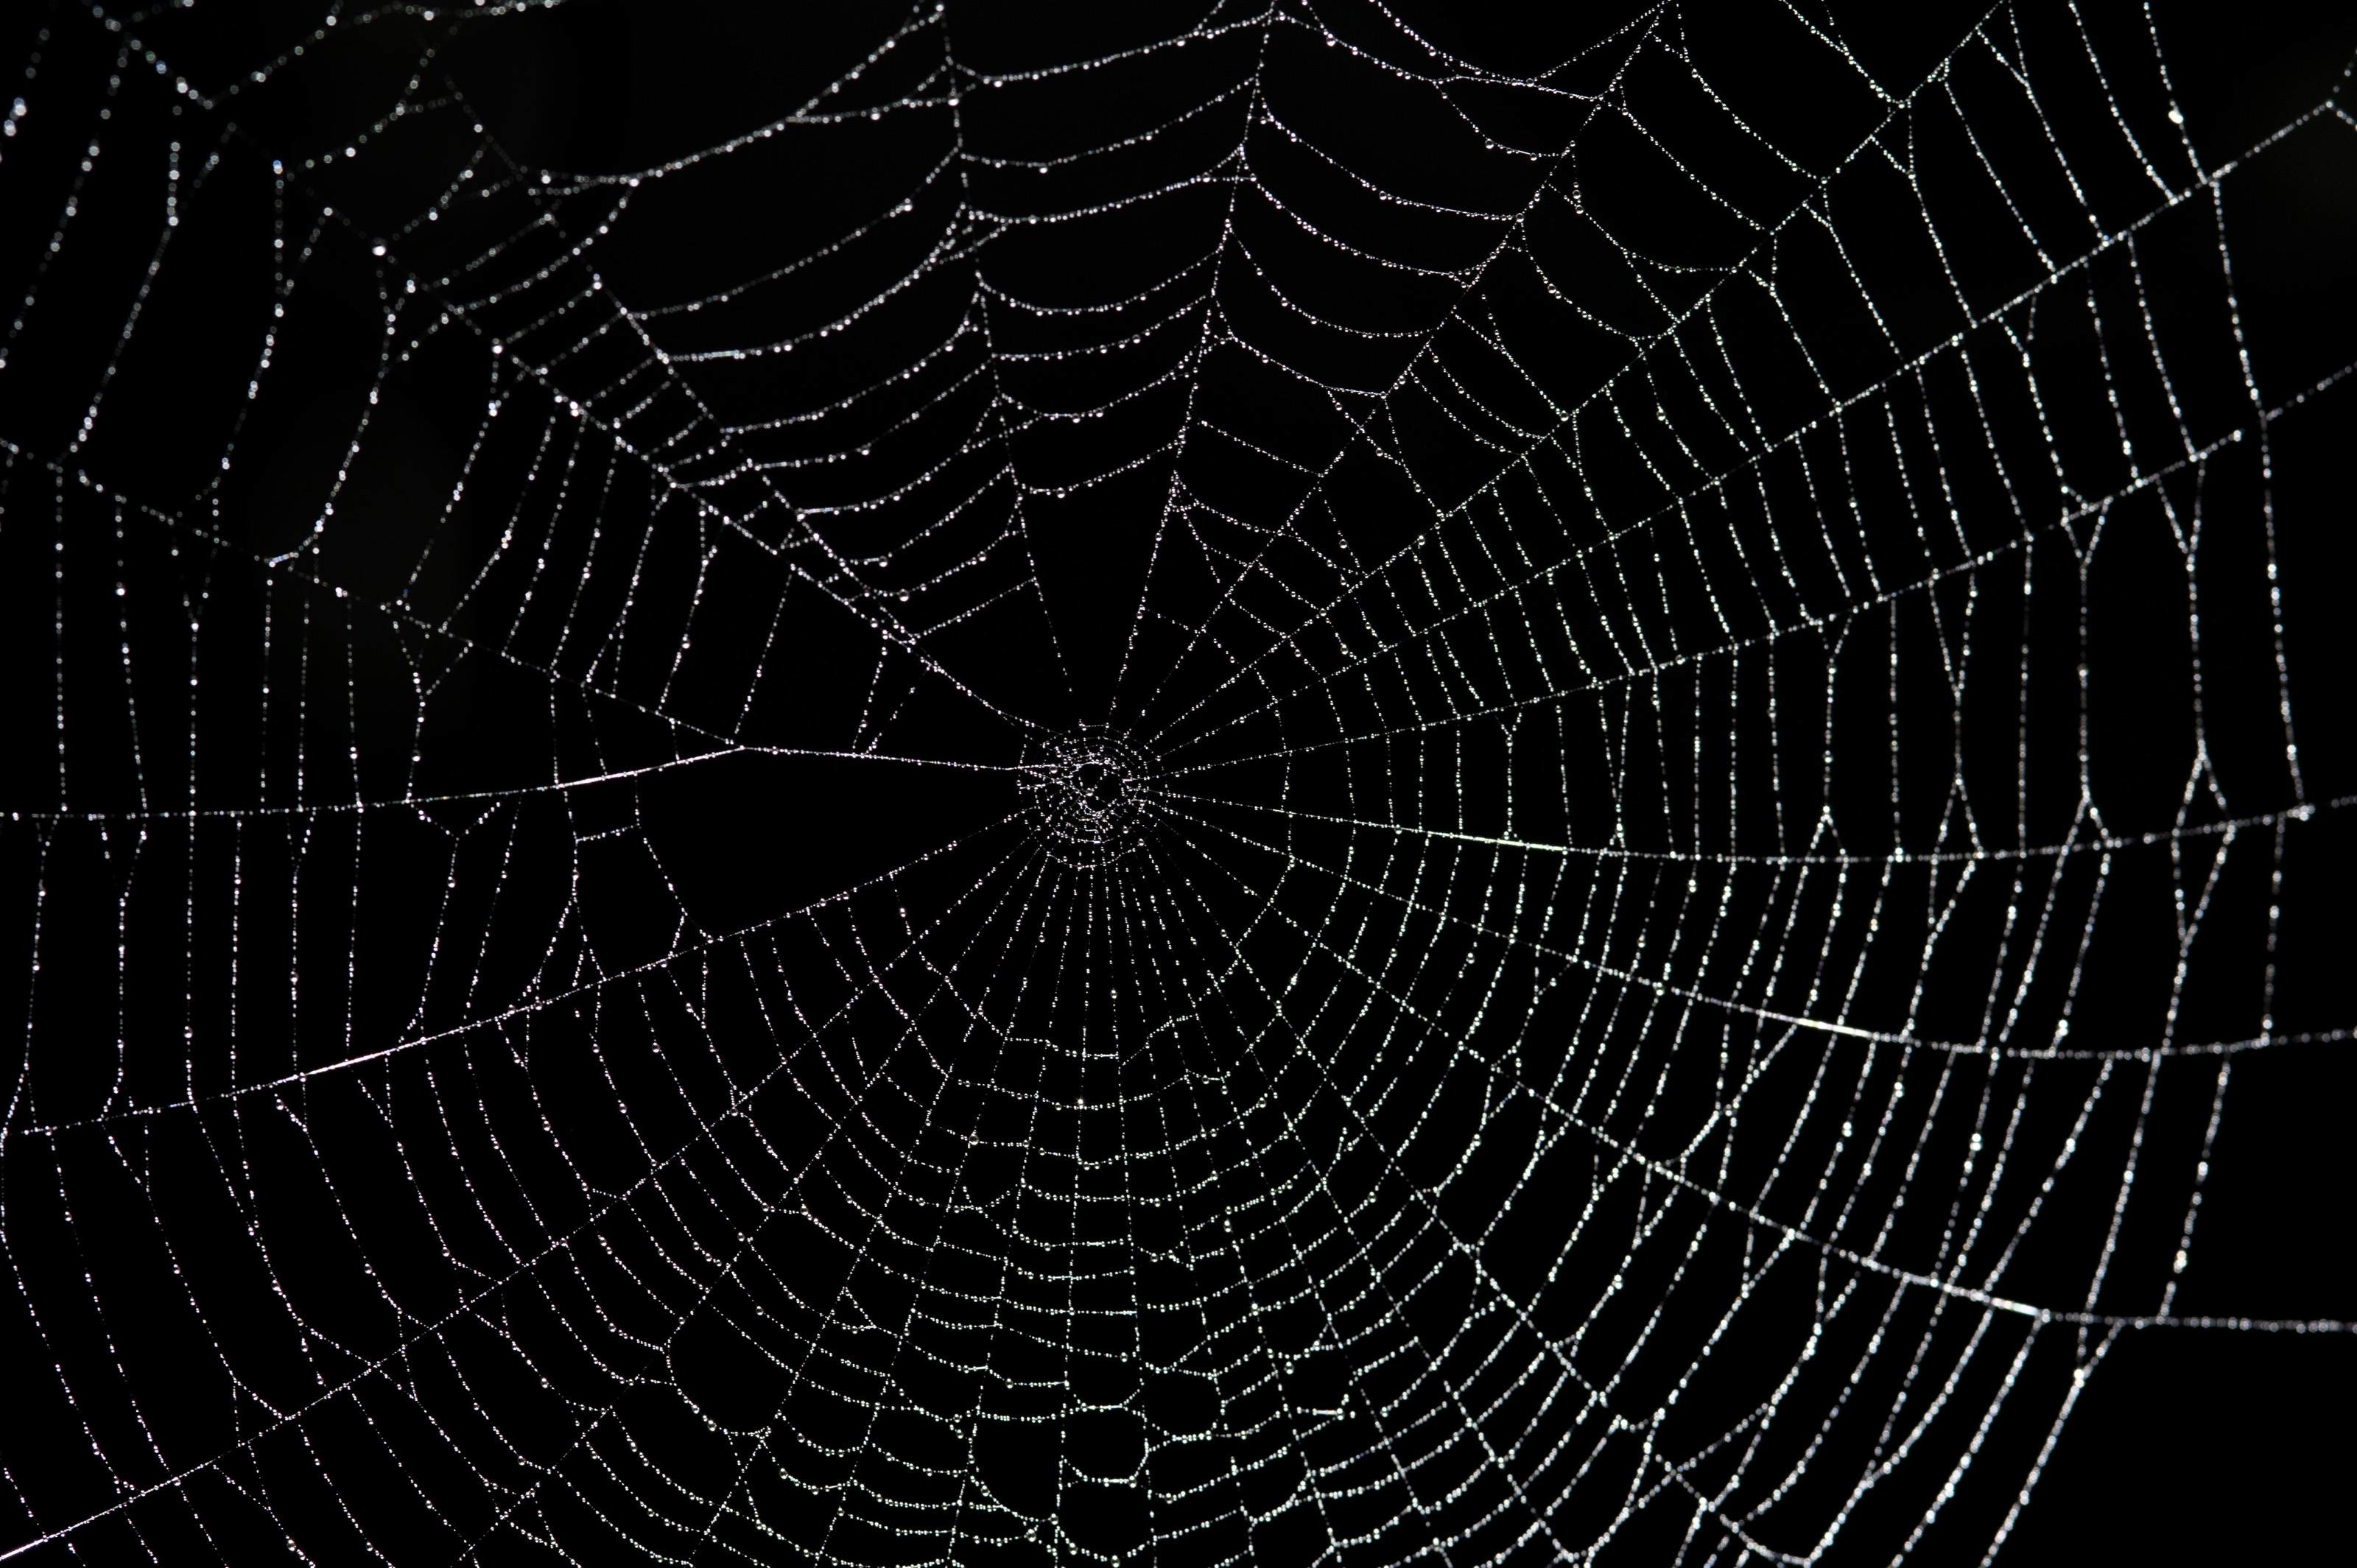 Large spider web 8147 Stockarch